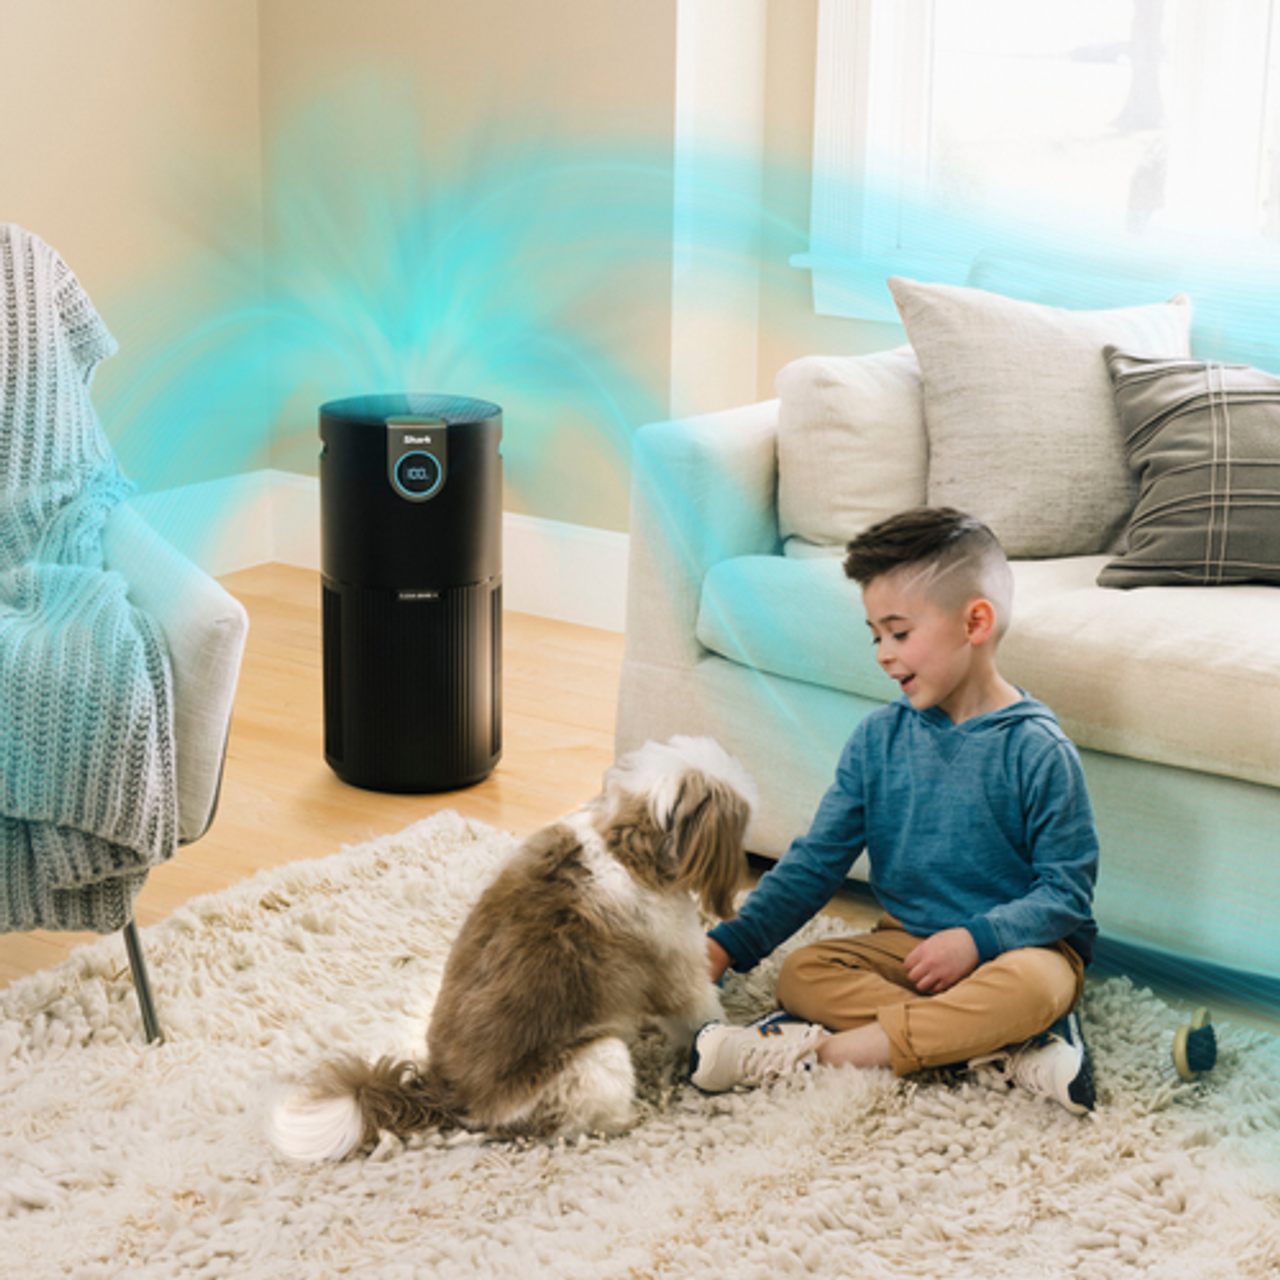 Shark - Air Purifier MAX with True HEPA, Microban Antimicrobial Protection, Cleans up to 1200 Sq. Ft - Charcoal Grey